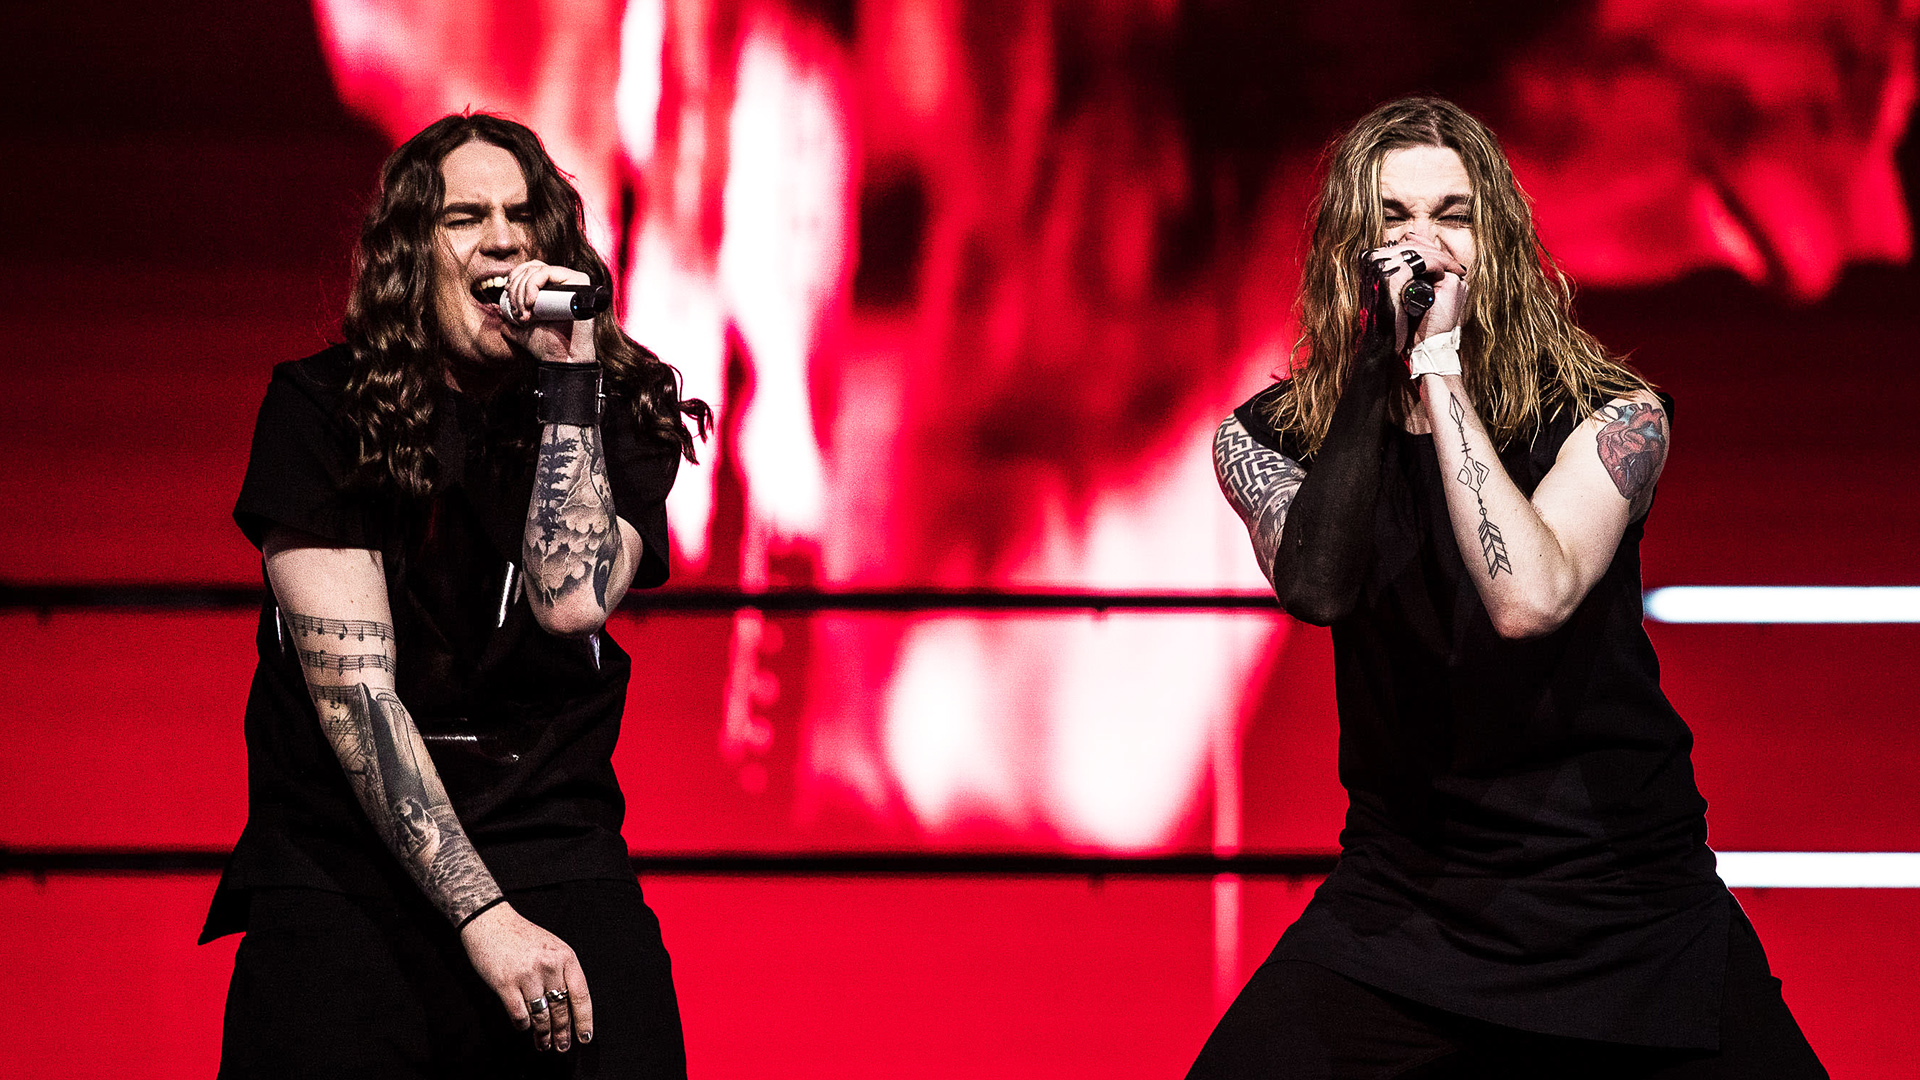 Finland hopes for a metal performance in the Eurovision Song Contest